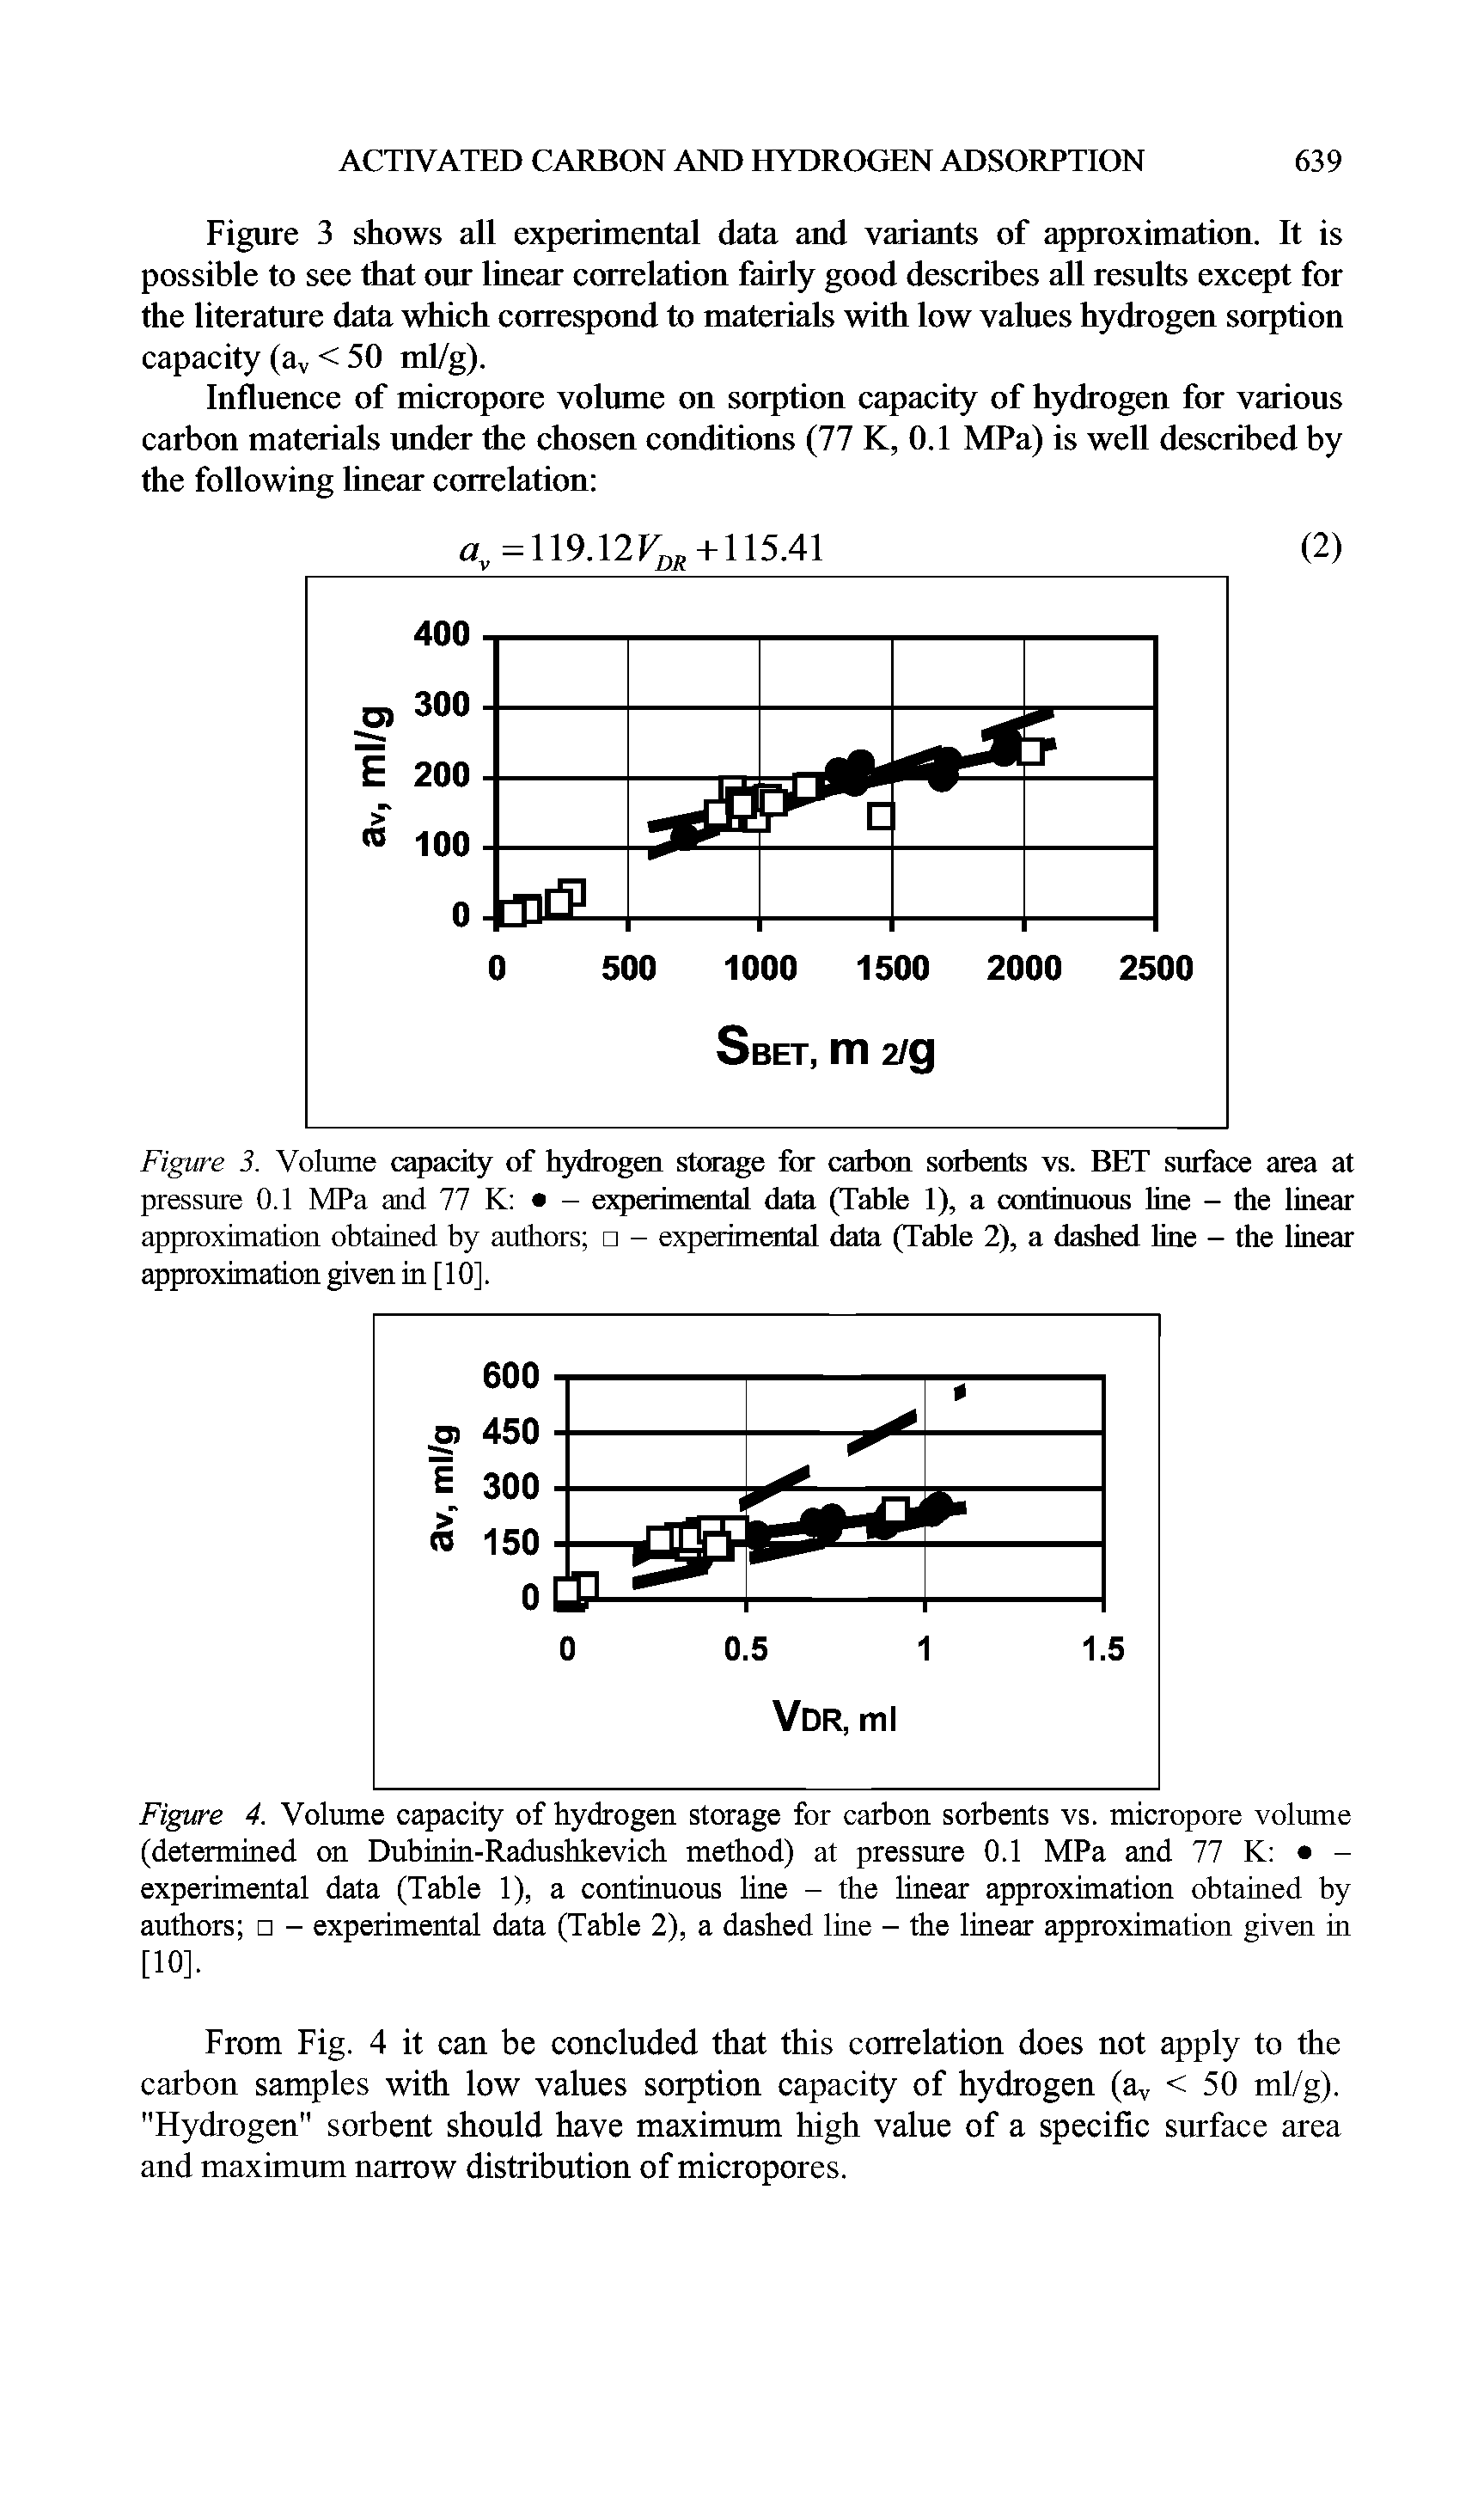 Figure 3. Volume capacity of hydrogen storage for carbon sorbents vs. BET surface area at pressure 0.1 MPa and 77 K - experimental data (Table 1), a continuous line - the linear approximation obtained by authors - experimental data (Table 2), a dashed line - the linear approximation given in [10].